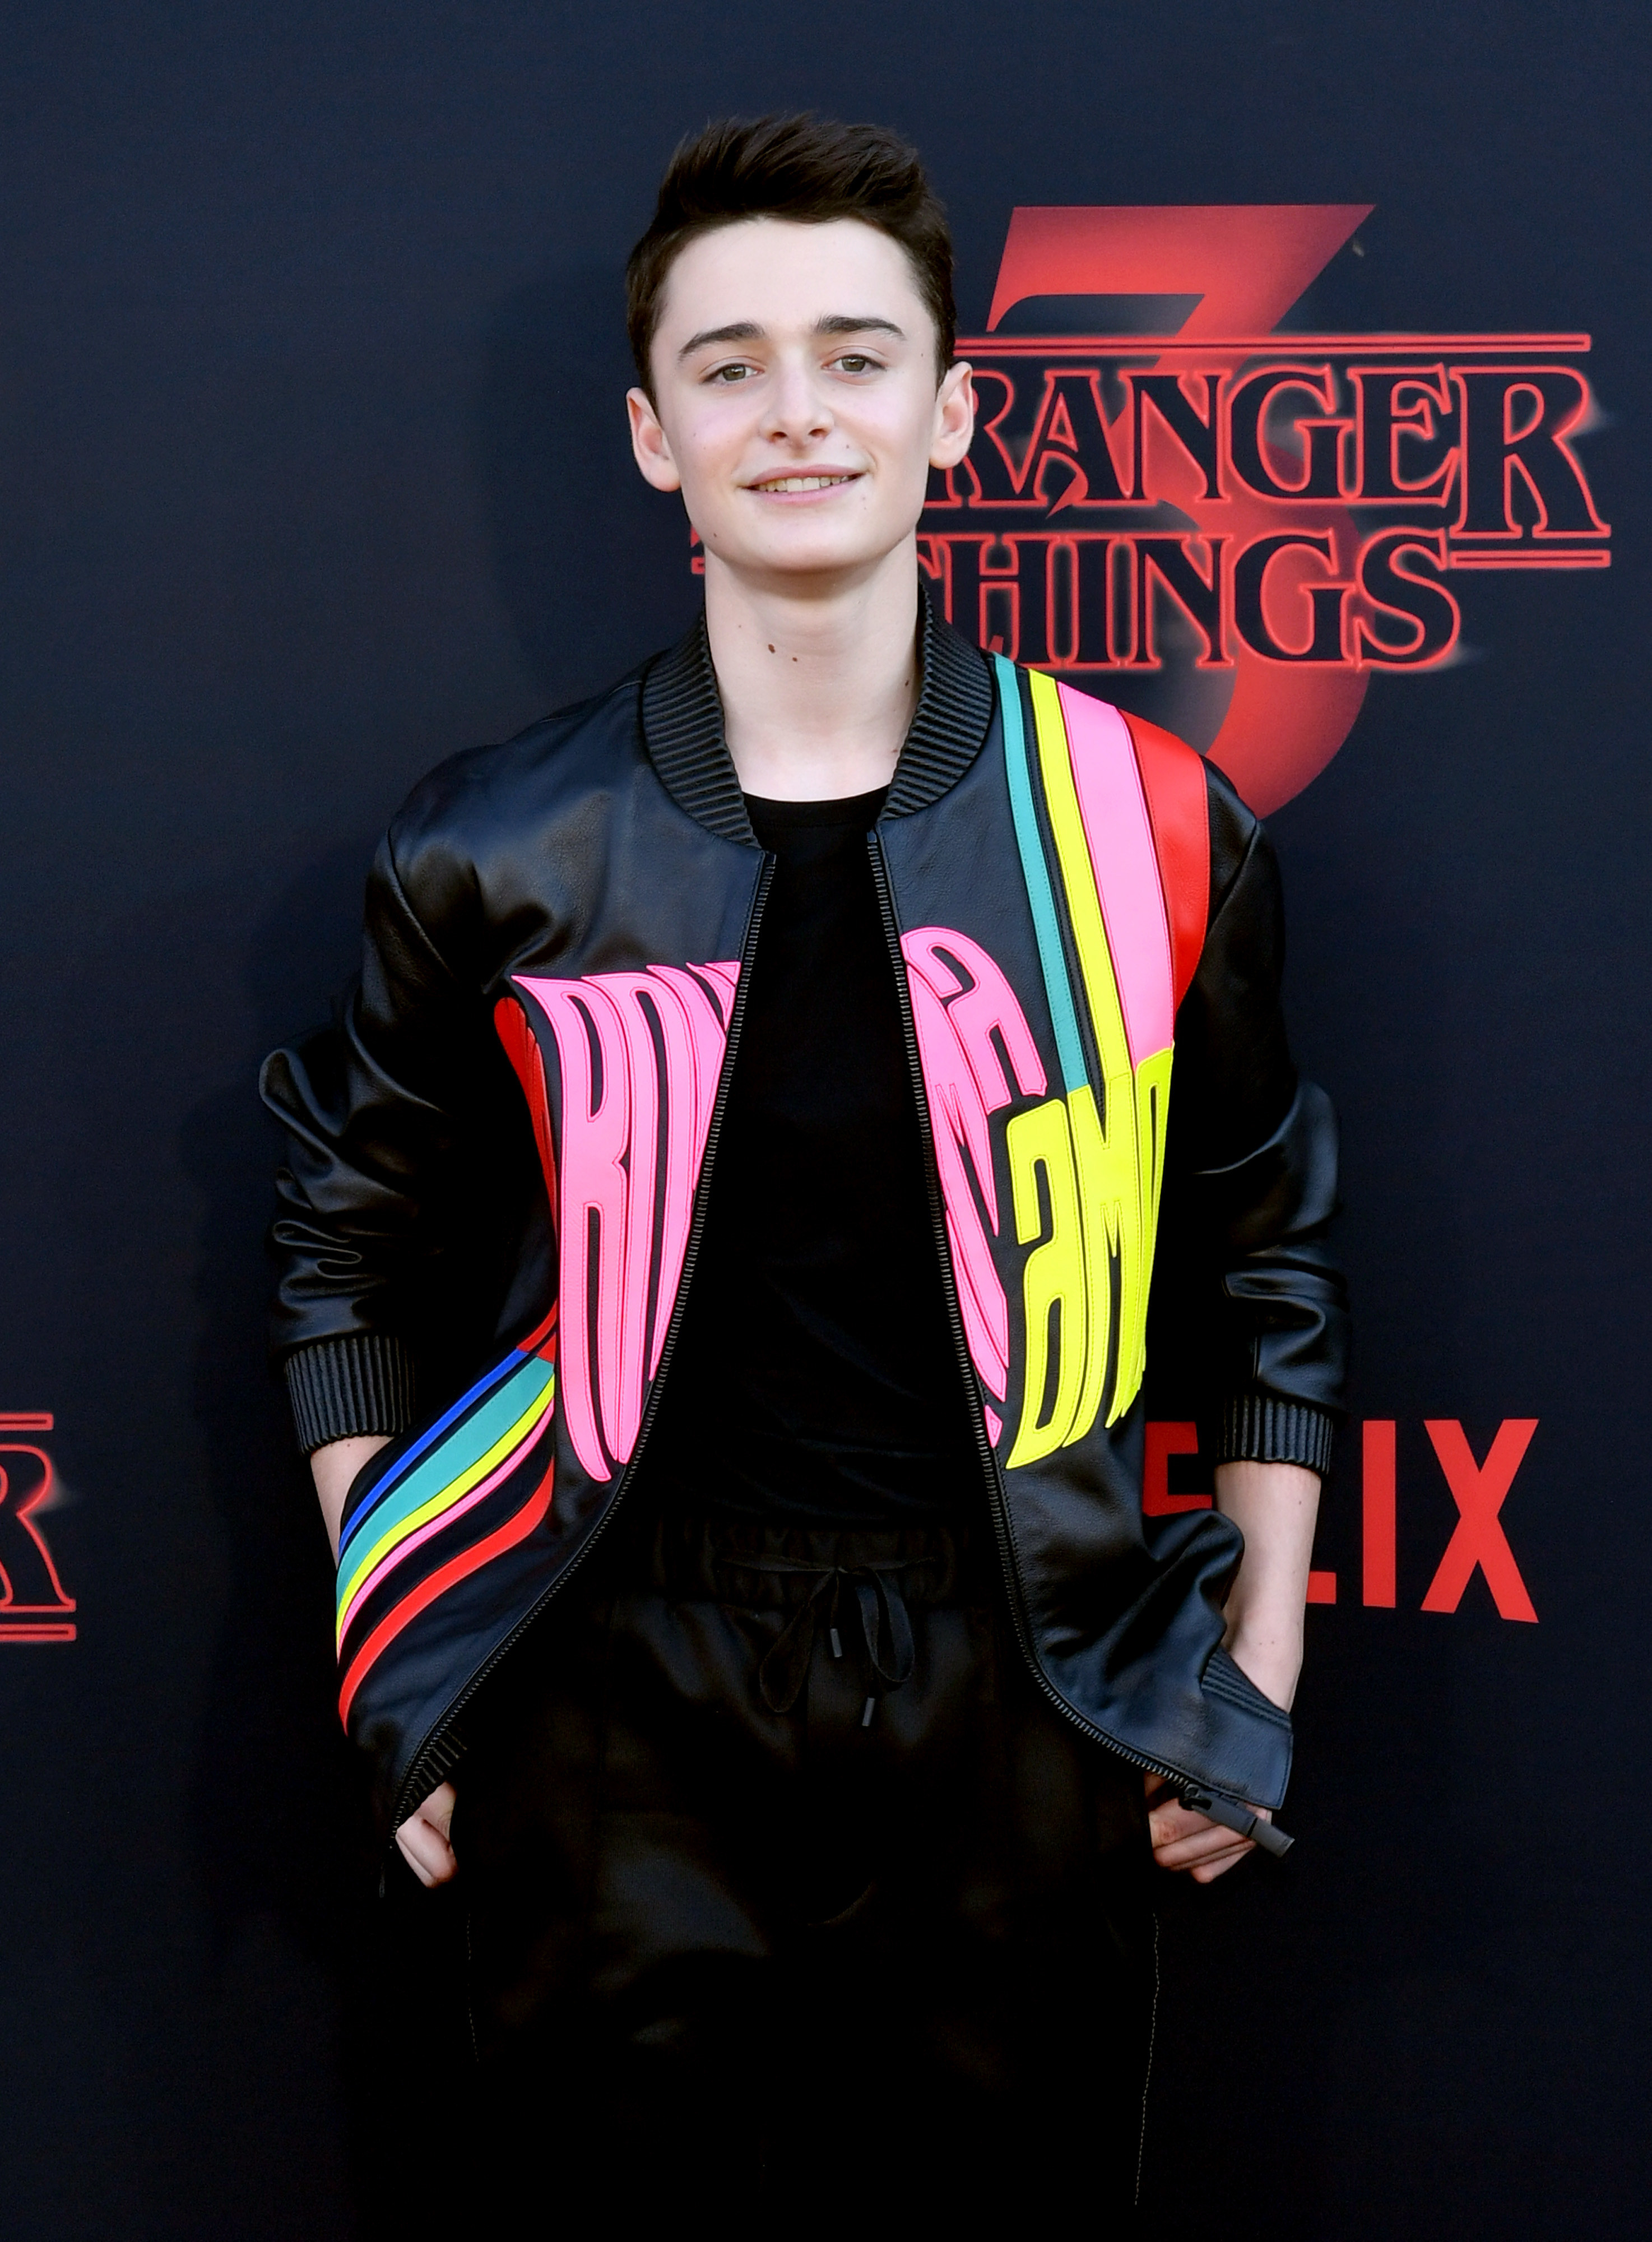 Stranger Things': Will is Gay and Loves Mike, Noah Schnapp Says